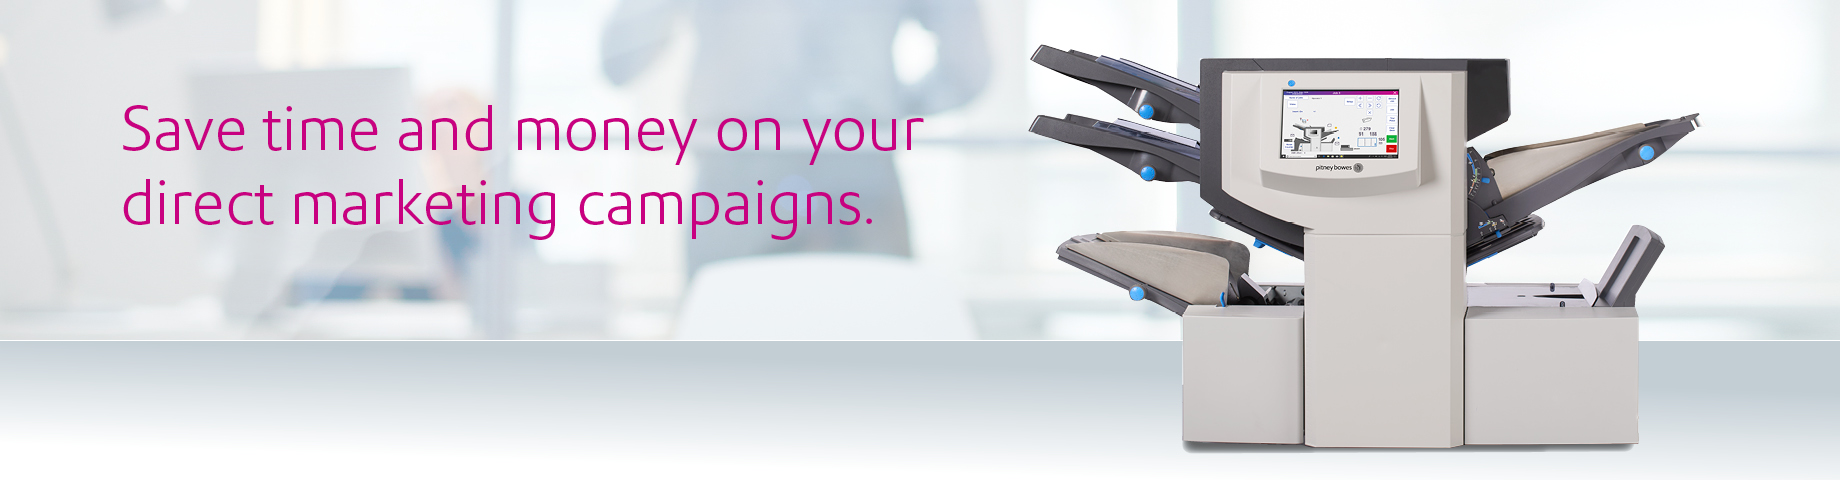 Save time and money on your direct marketing campaigns.